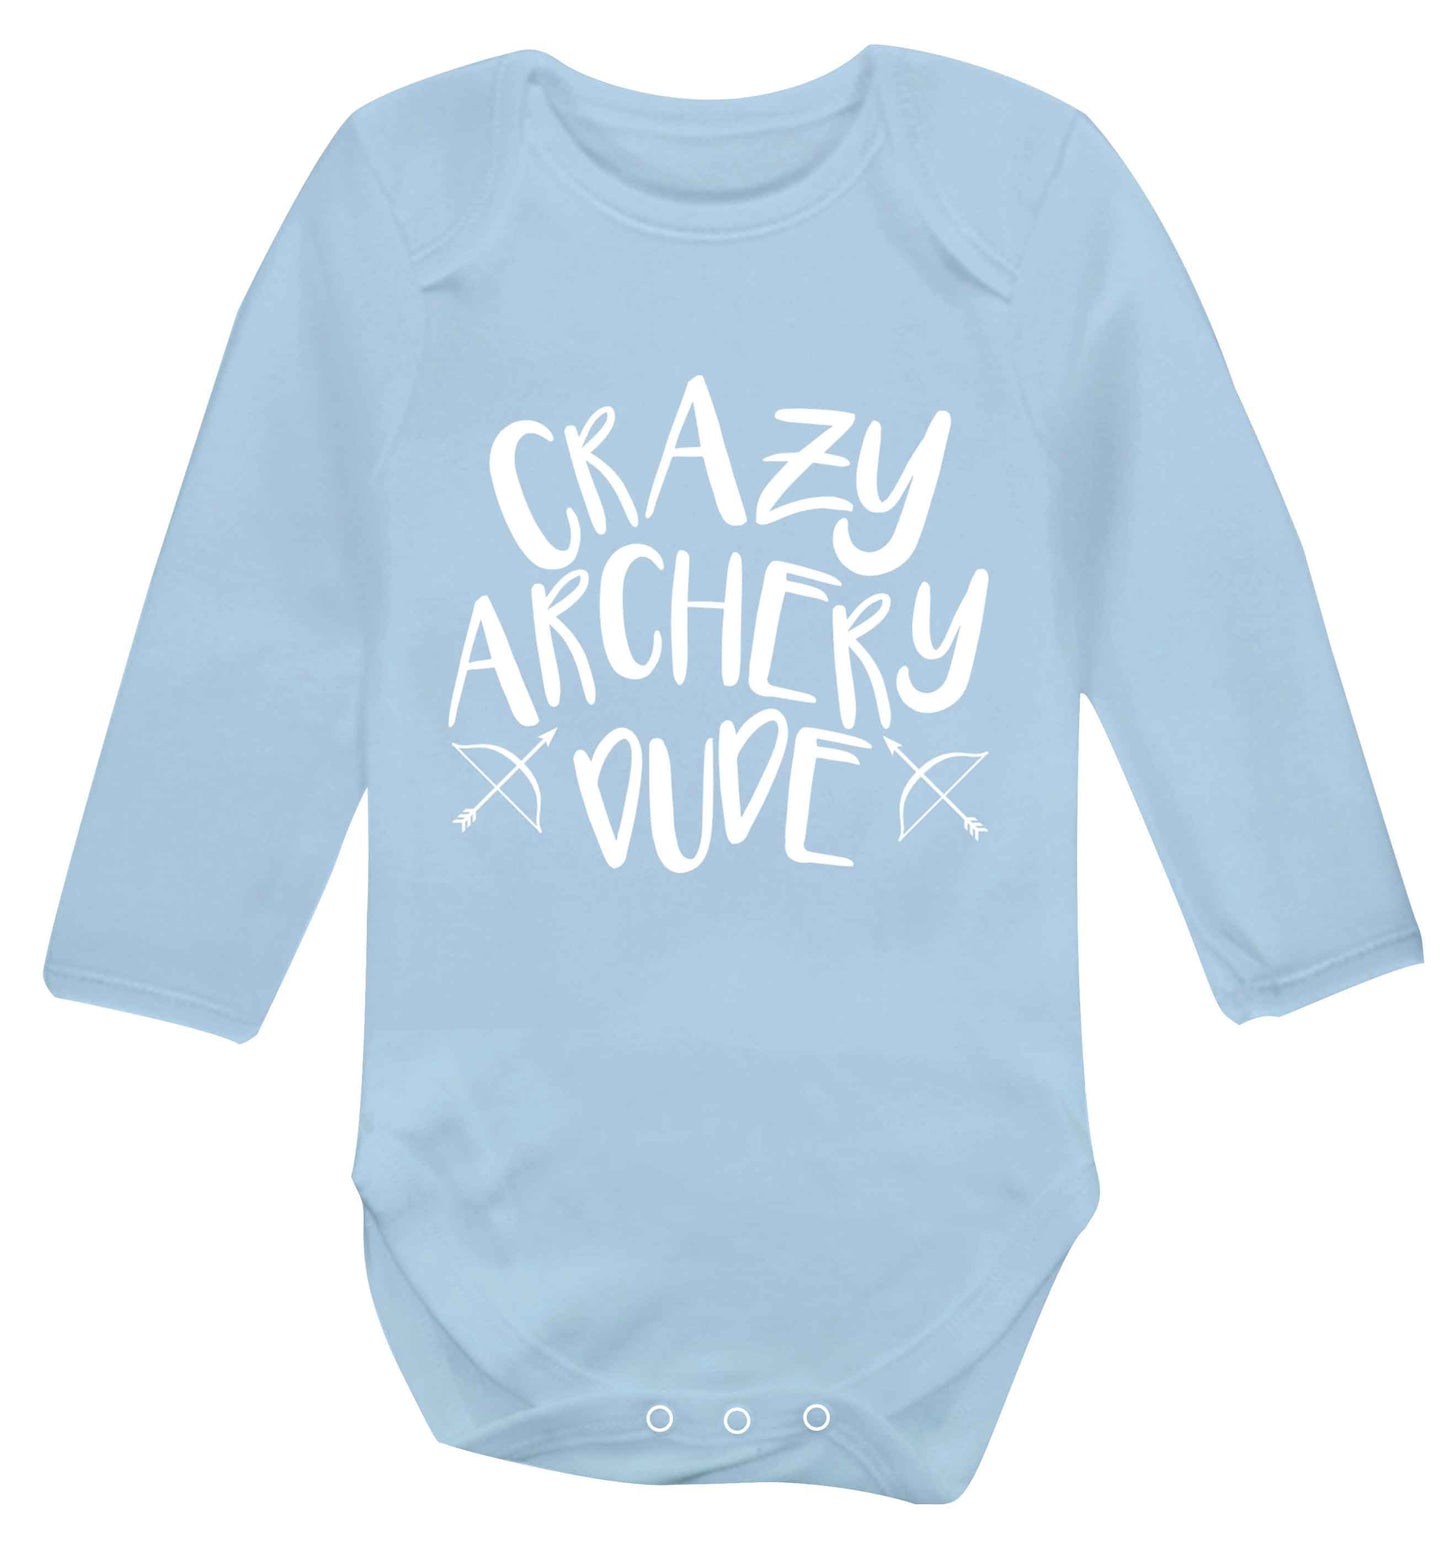 Crazy archery dude Baby Vest long sleeved pale blue 6-12 months